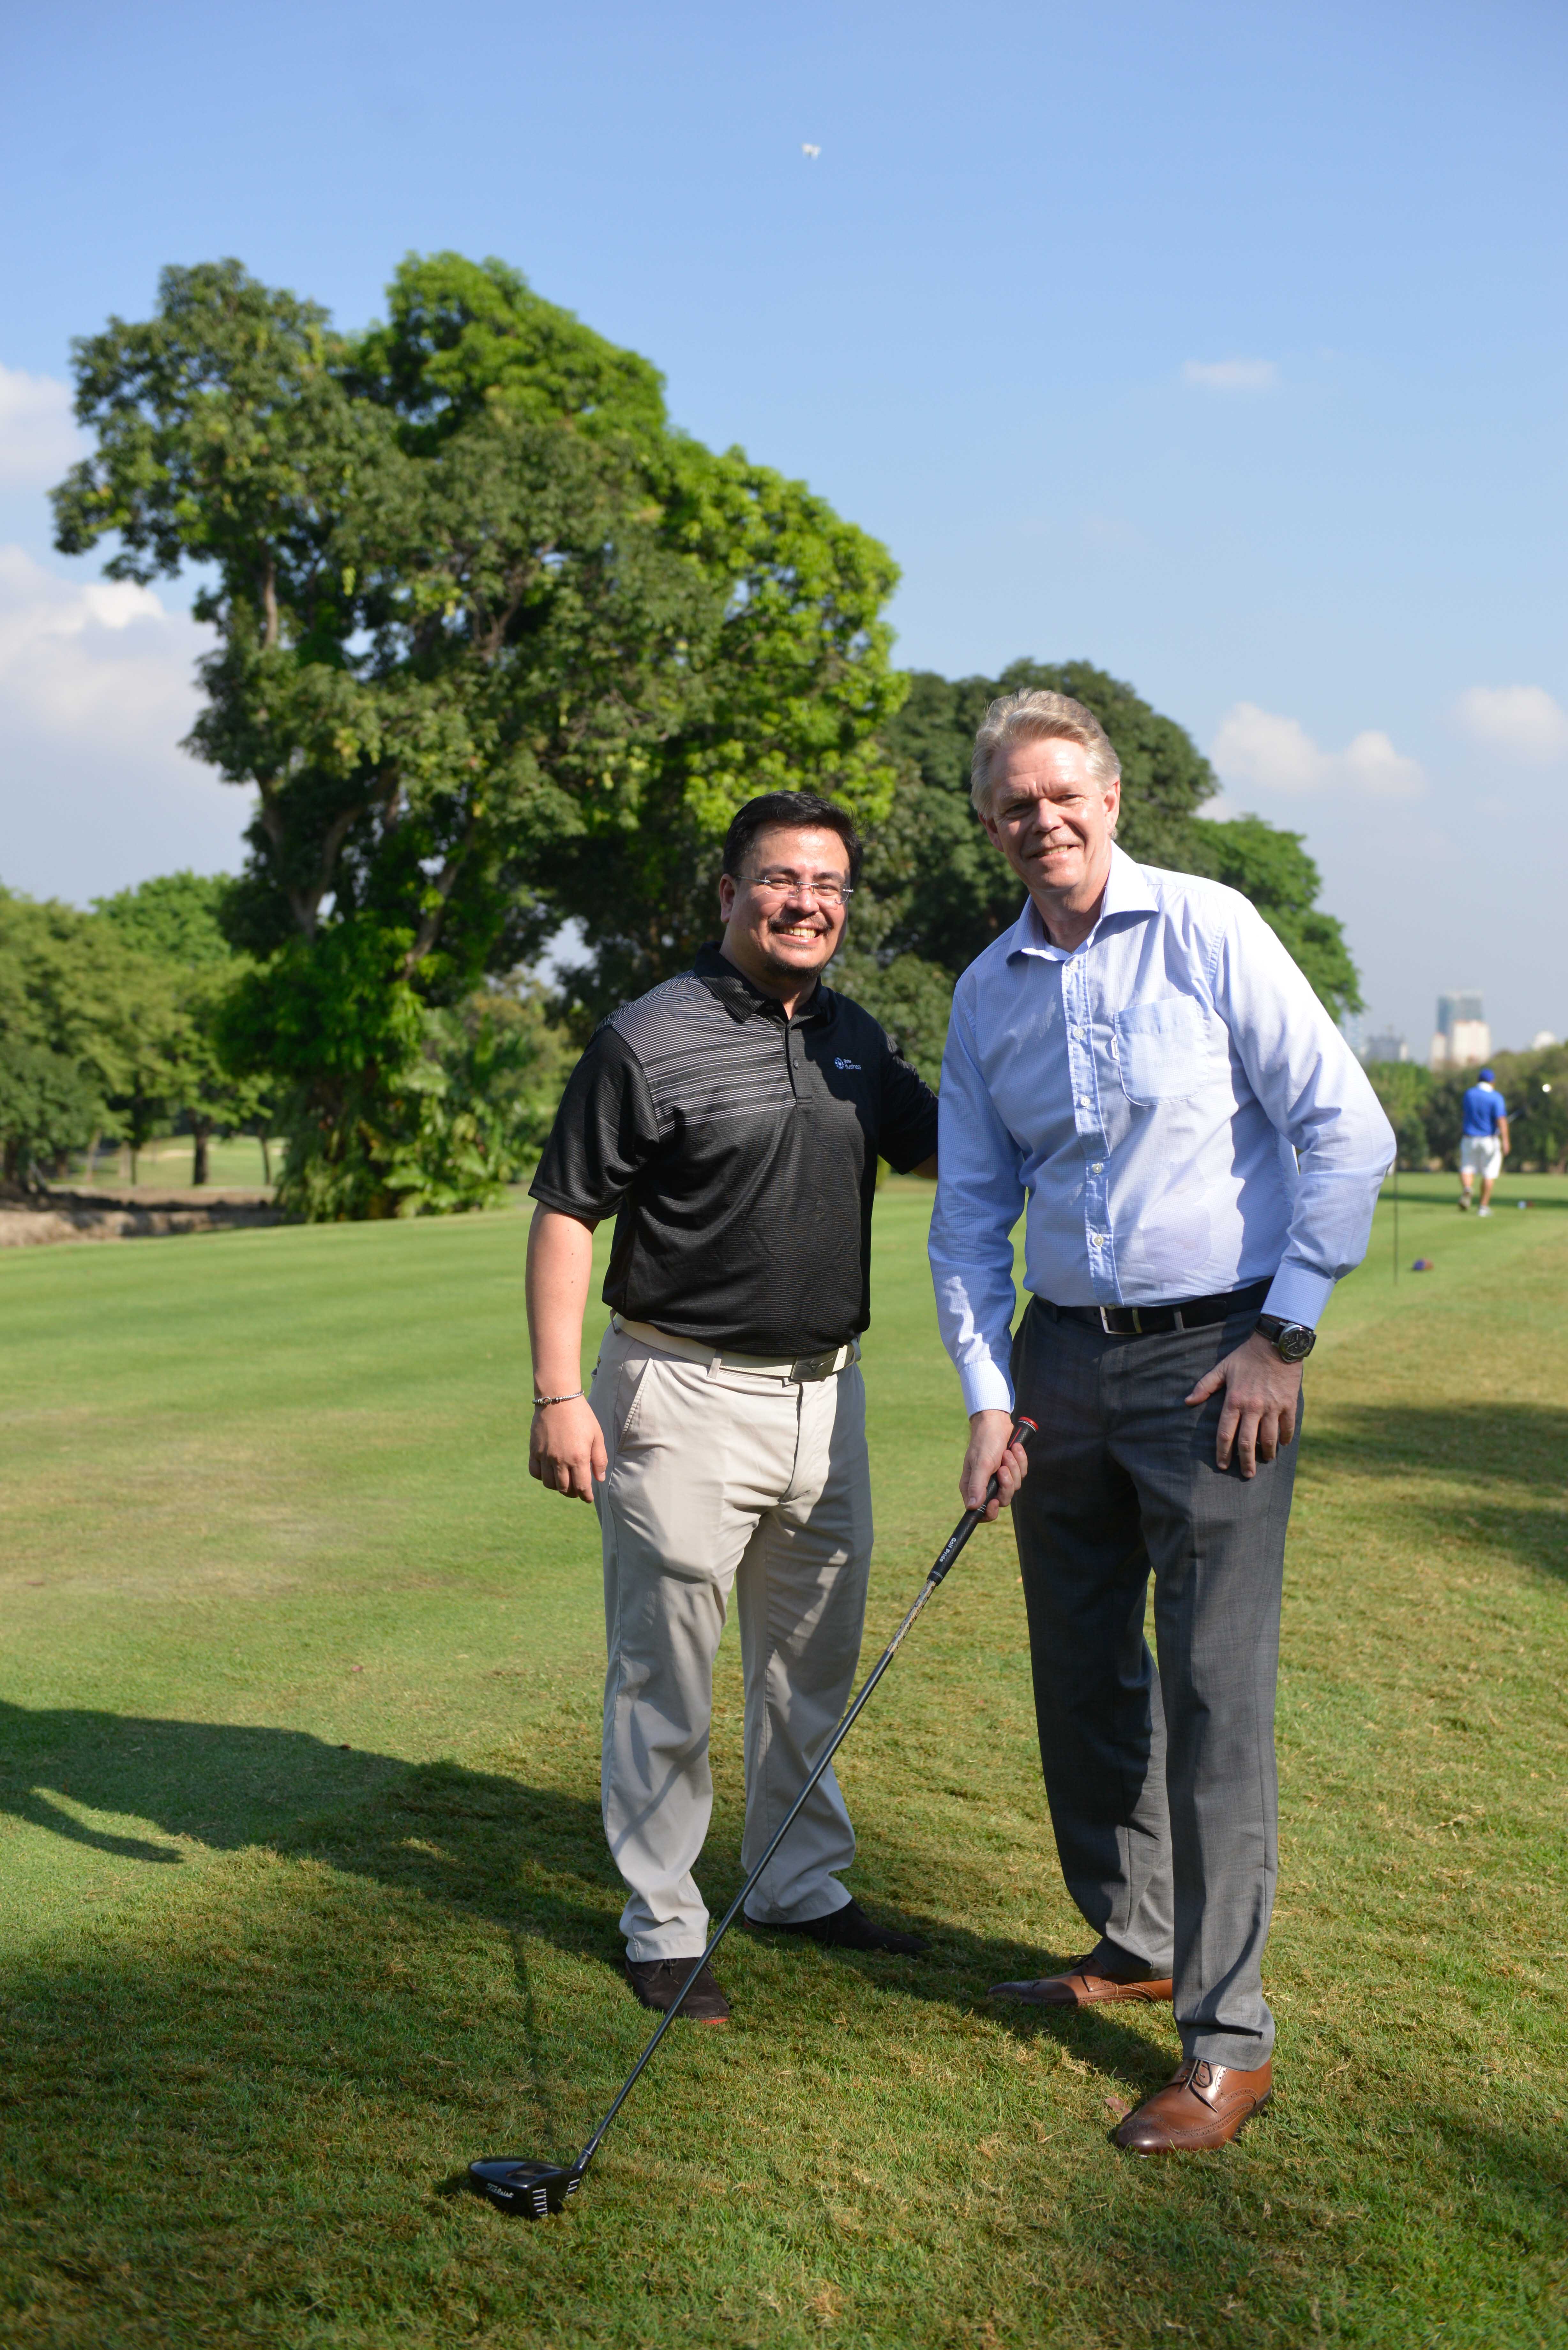 Globe Senior Advisor for Enterprise and IT-Enabled Services Group Mike Frausing (right) leads the ceremonial tee off together with Globe Business Vice President for Enterprise Sales Dion Asencio (left).